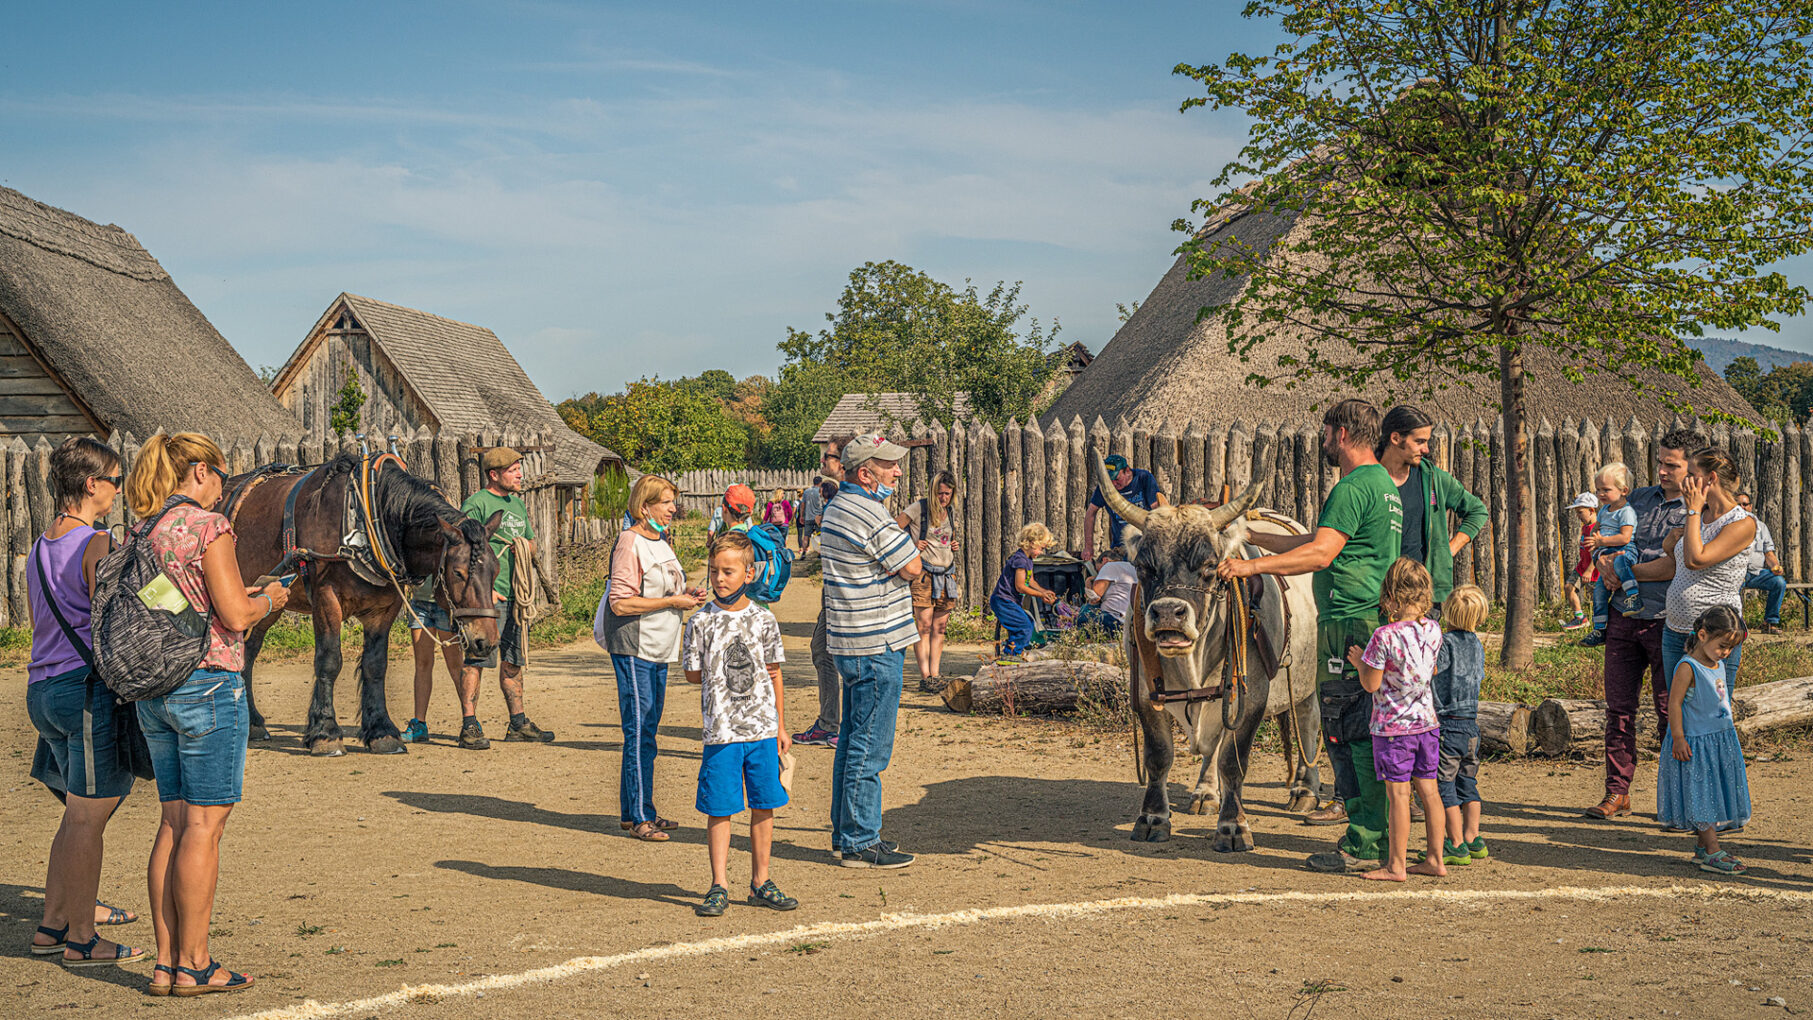 Visitors to Lauresham with horse and aurochs